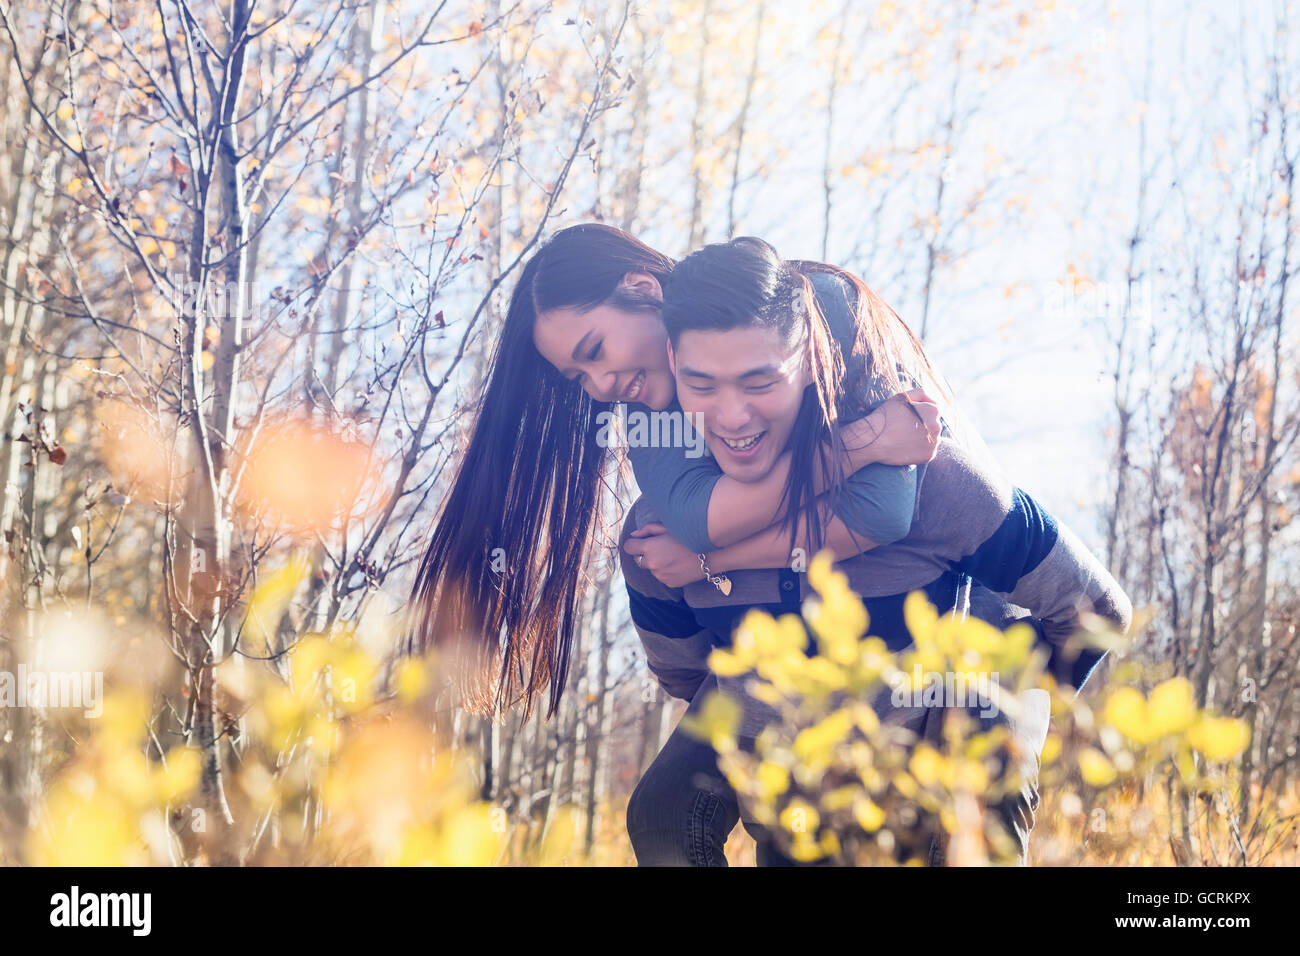 A young Asian woman riding piggy back on her boyfriend while walking in a park in autumn; Edmonton, Alberta, Canada Stock Photo